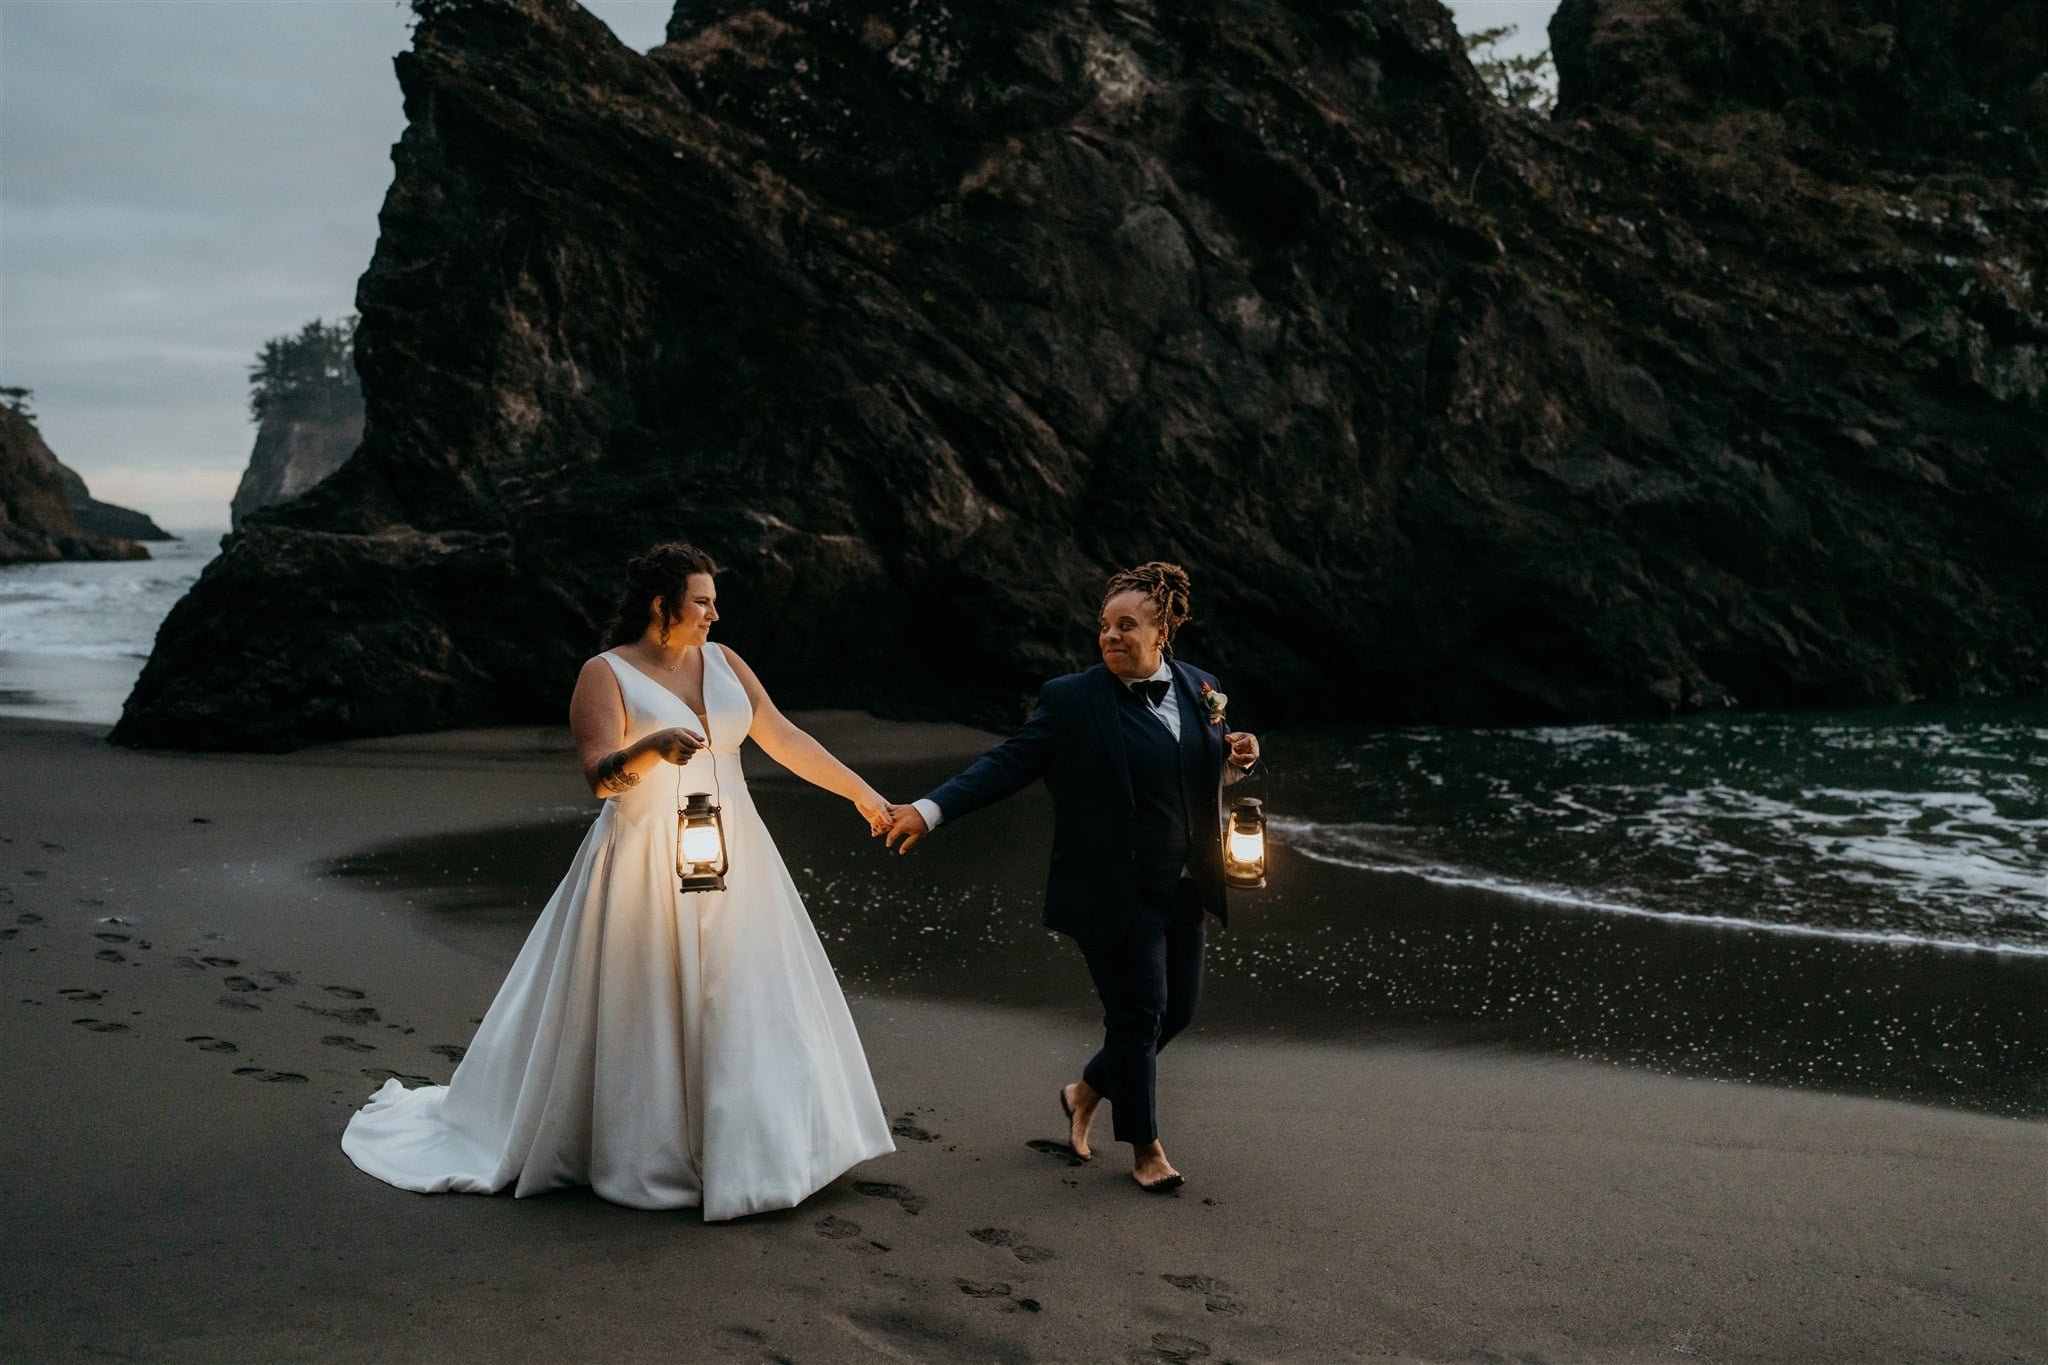 Two brides holding lanterns and walking along the beach on the Oregon Coast during sunset